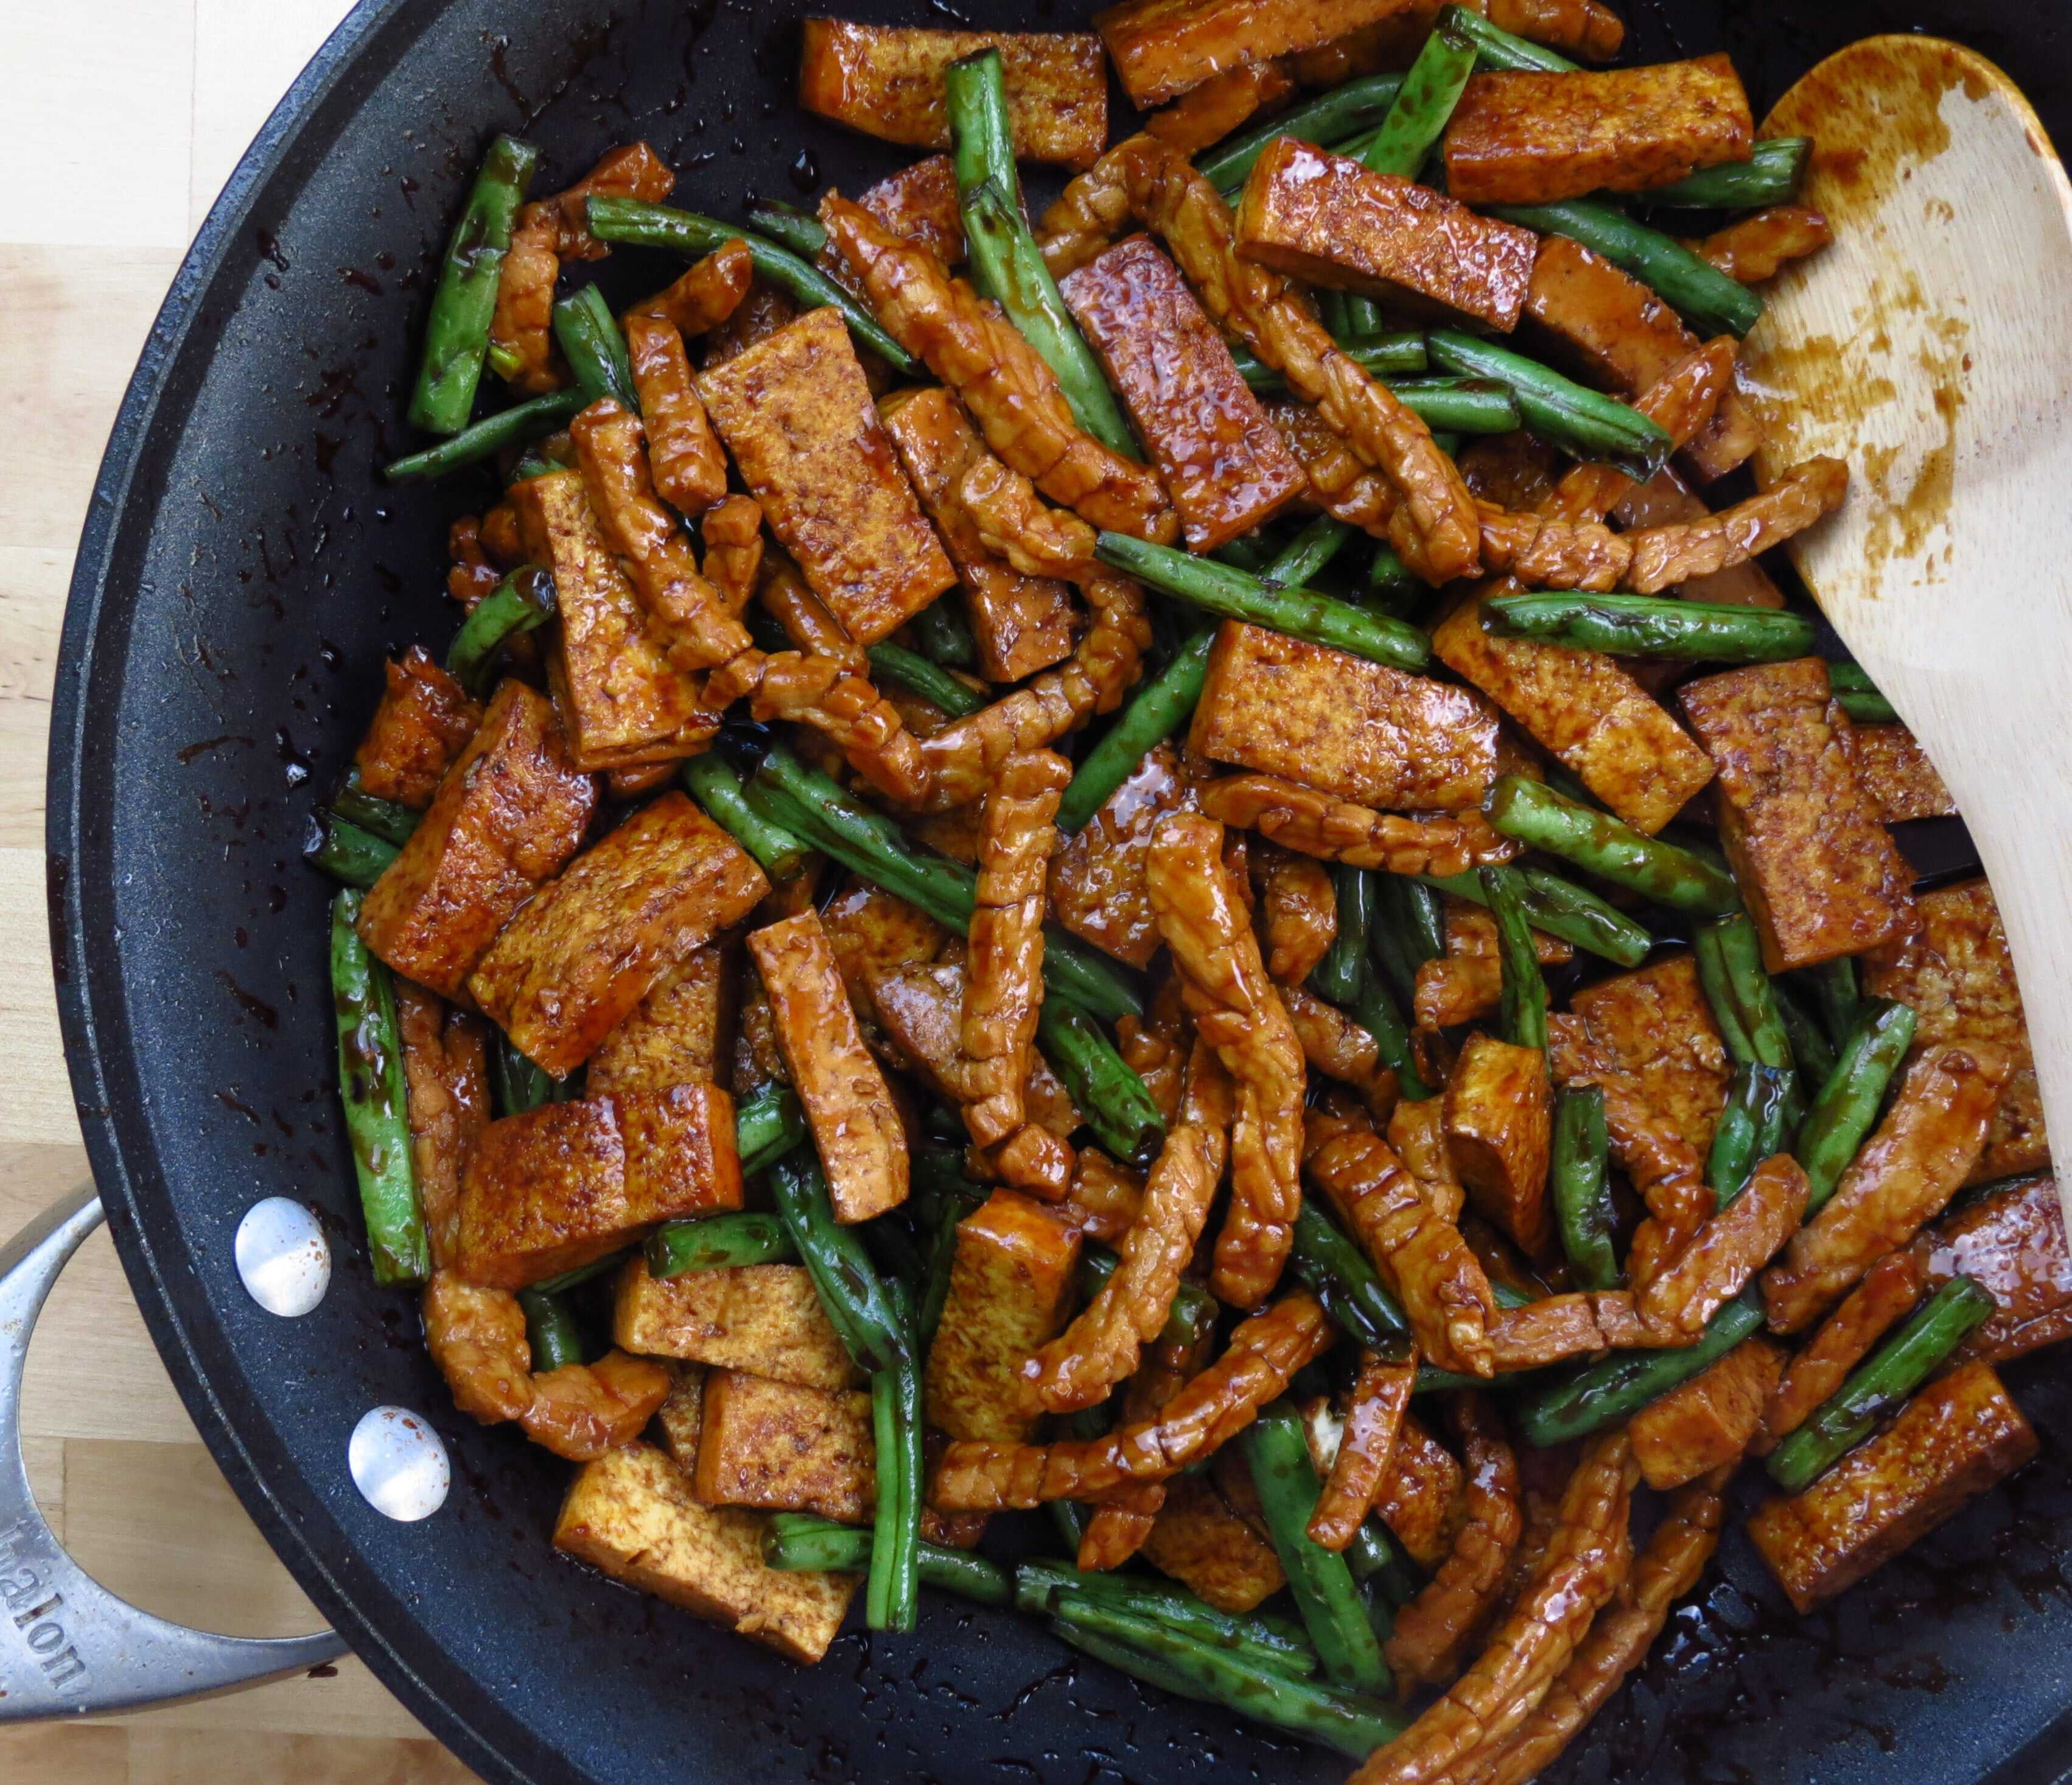 8 Tips to a Great Stir Fry: Honey Soy Tofu, Green Beans and Pork Stir Fry